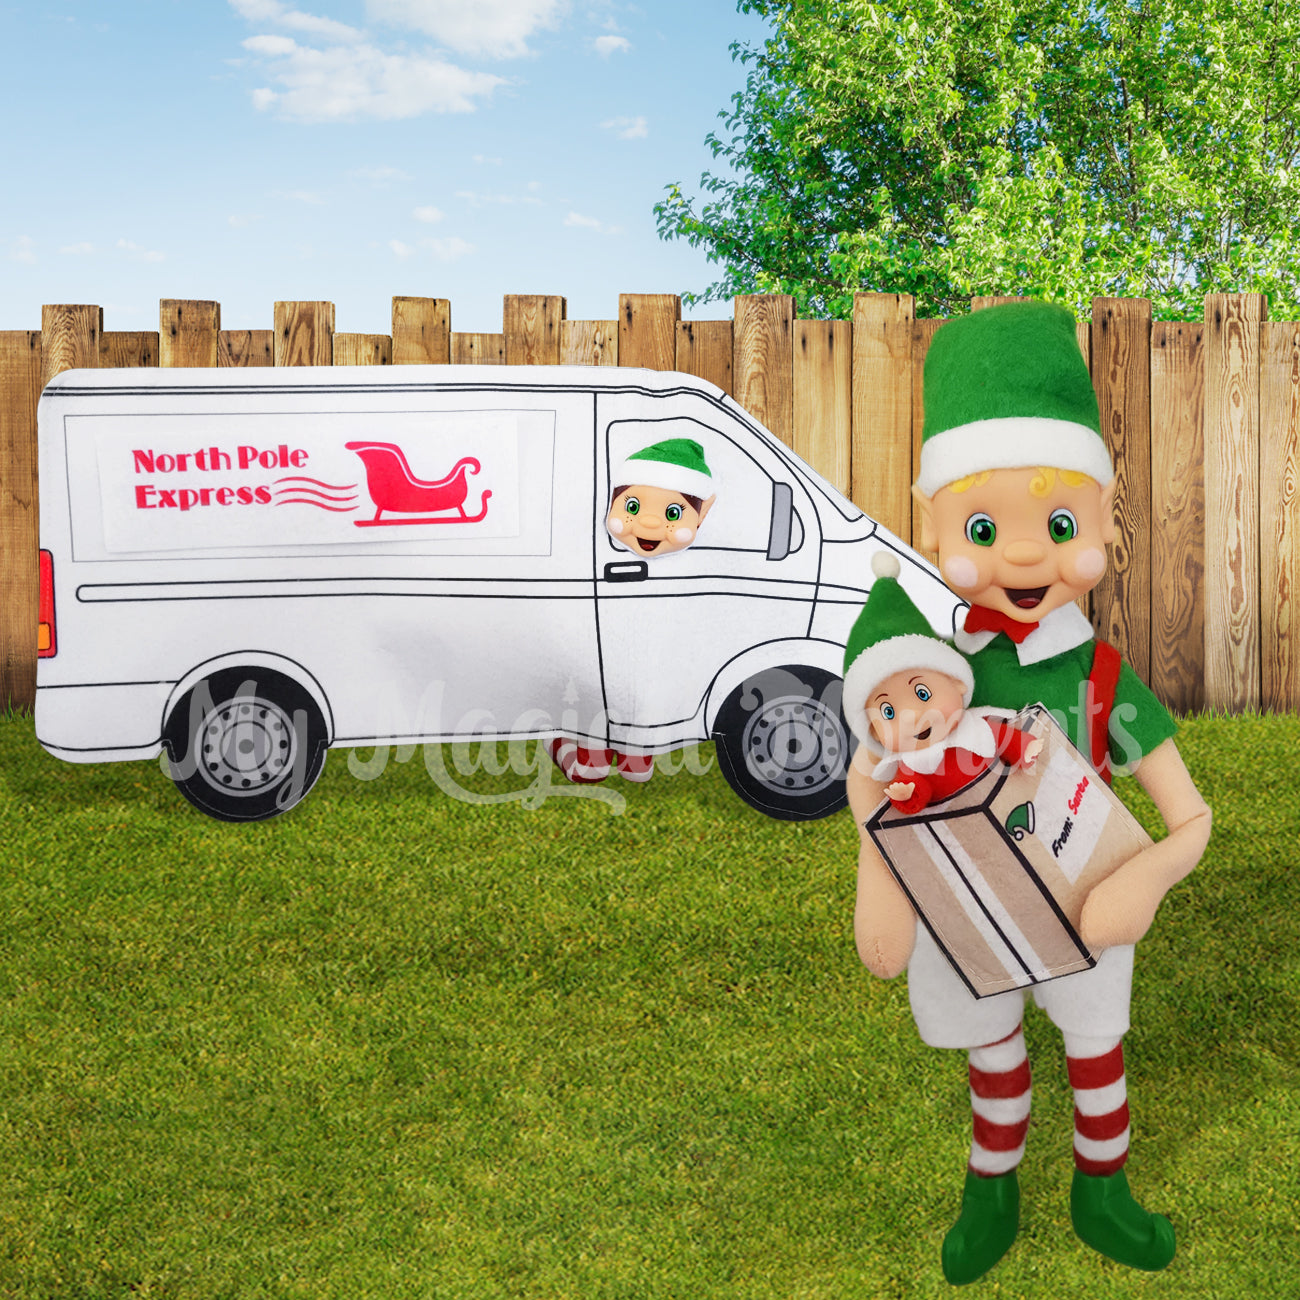 a elf scene with a elf dressed in a delivery van costume. With another elf delivering a elf baby dressed in a elf package outfit